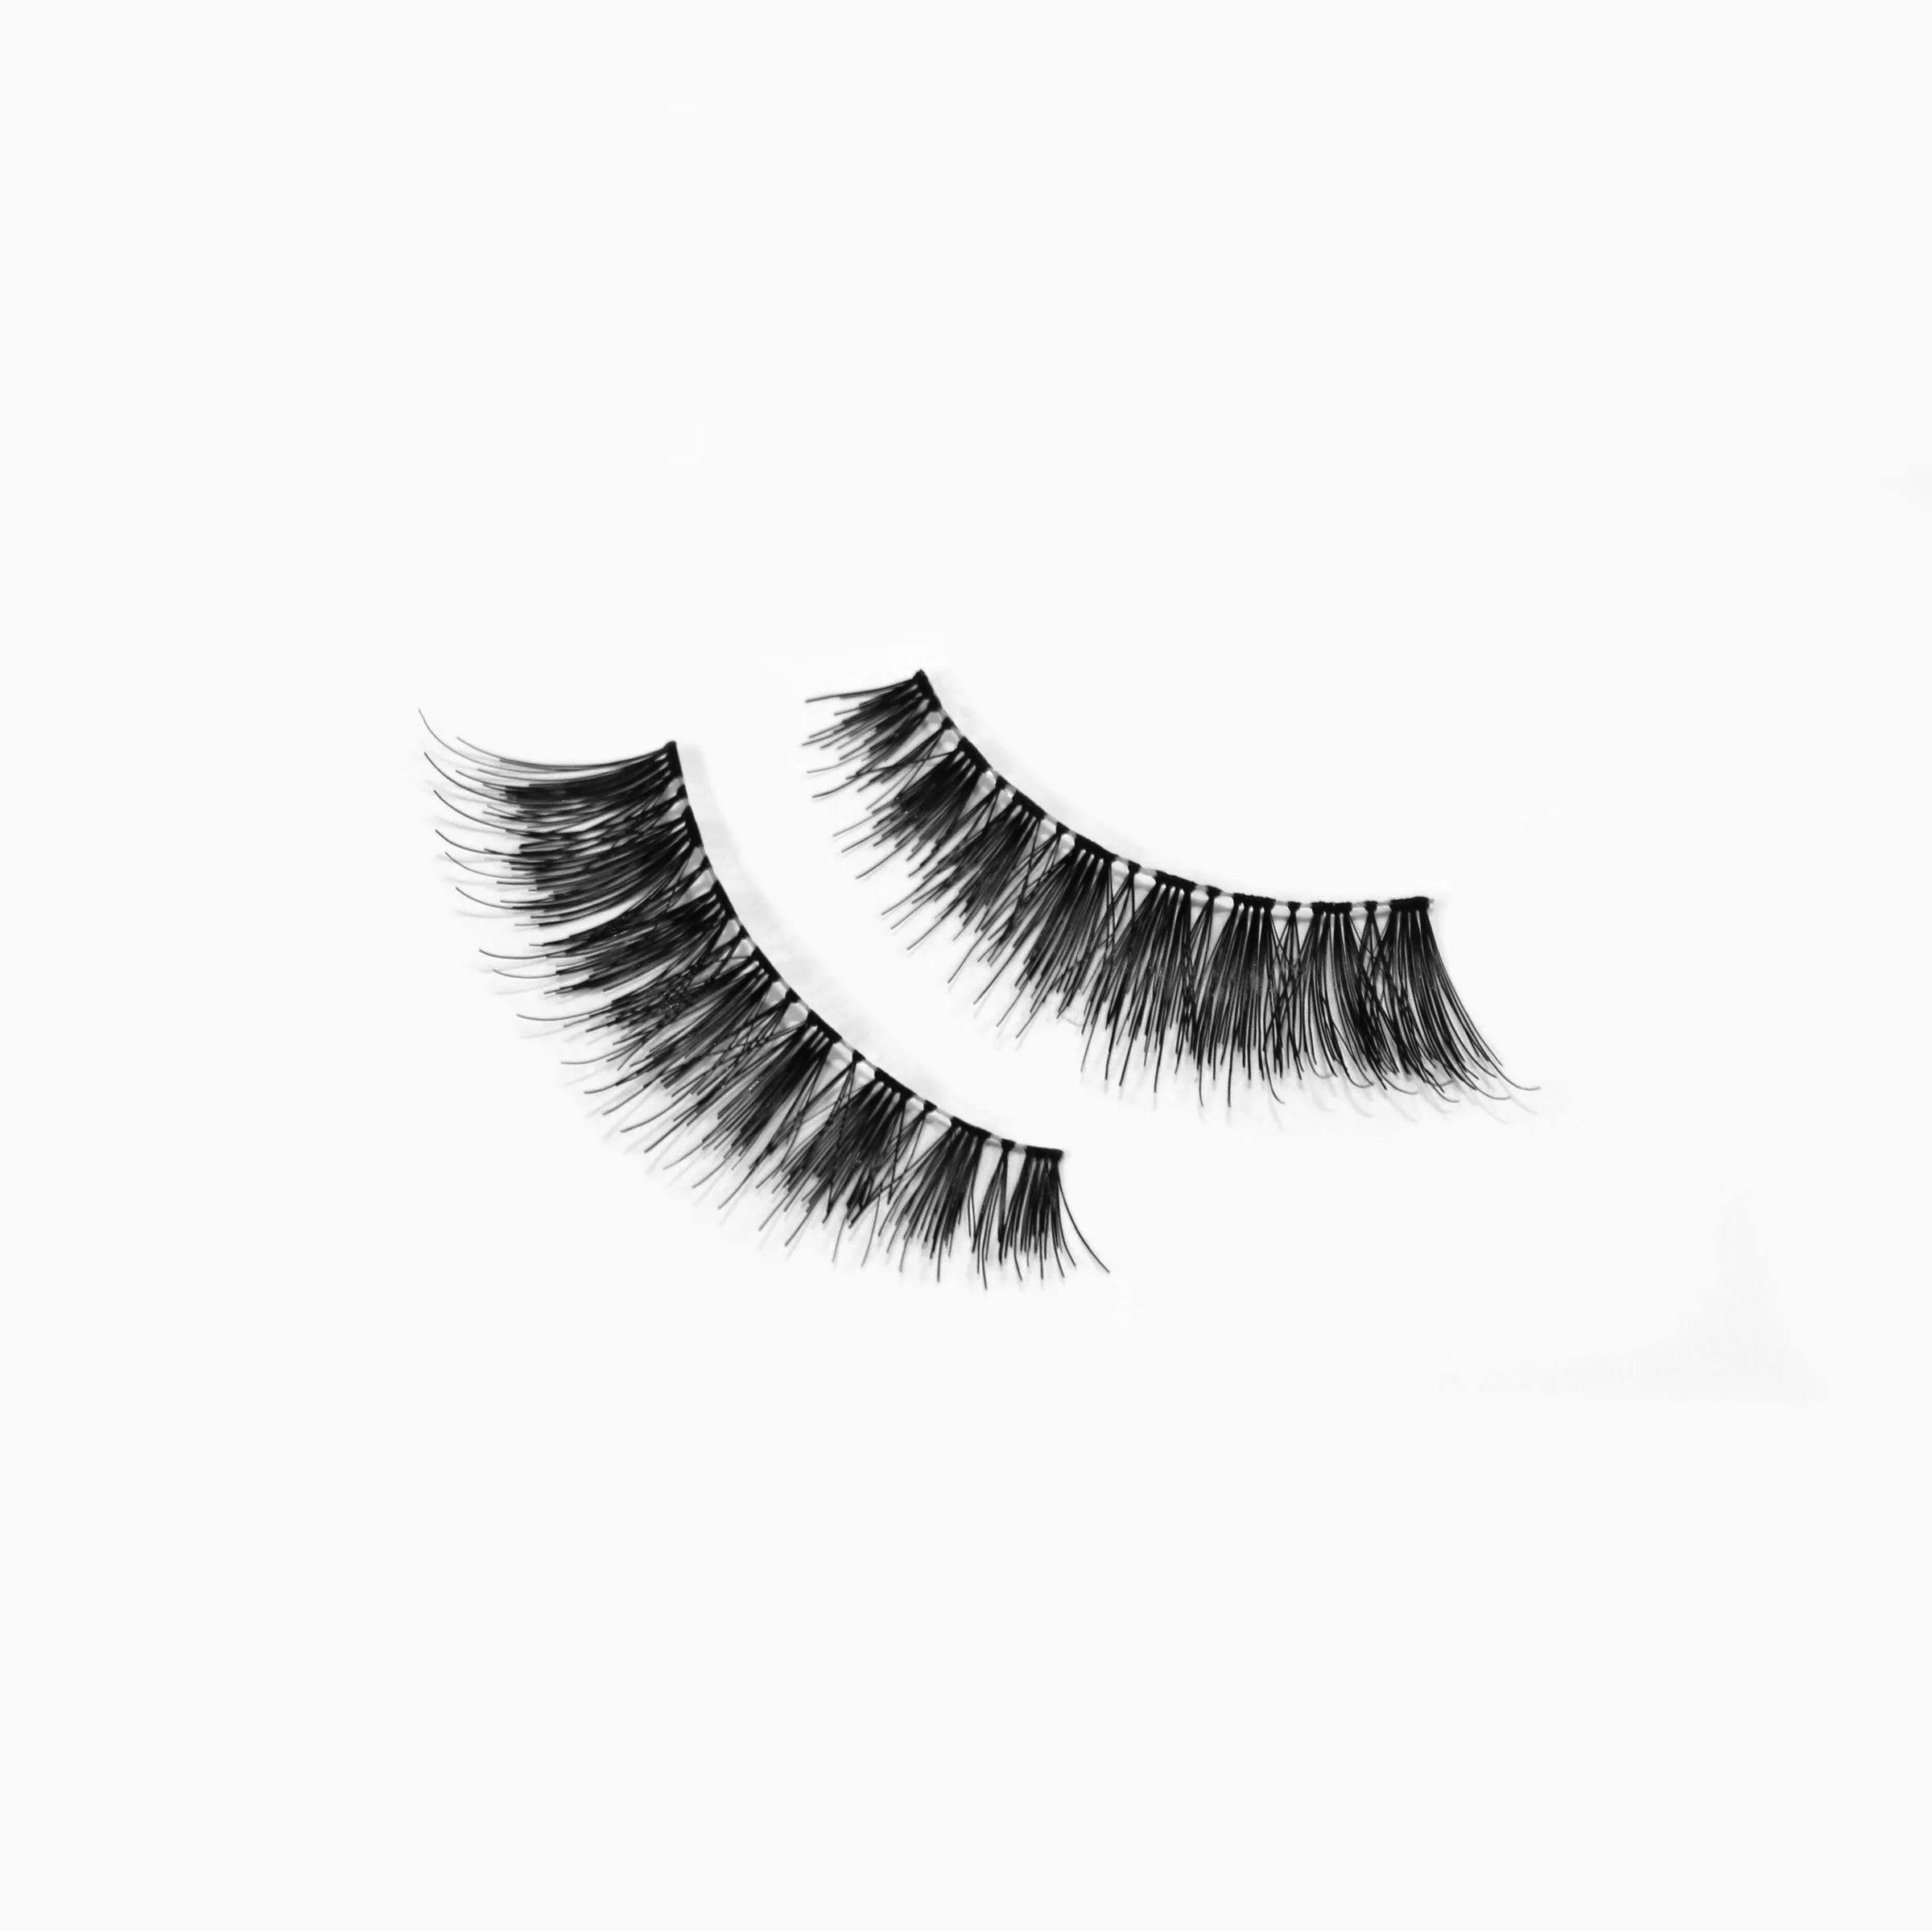 1000 Hour Natural Collection Lashes - Boho Black #553